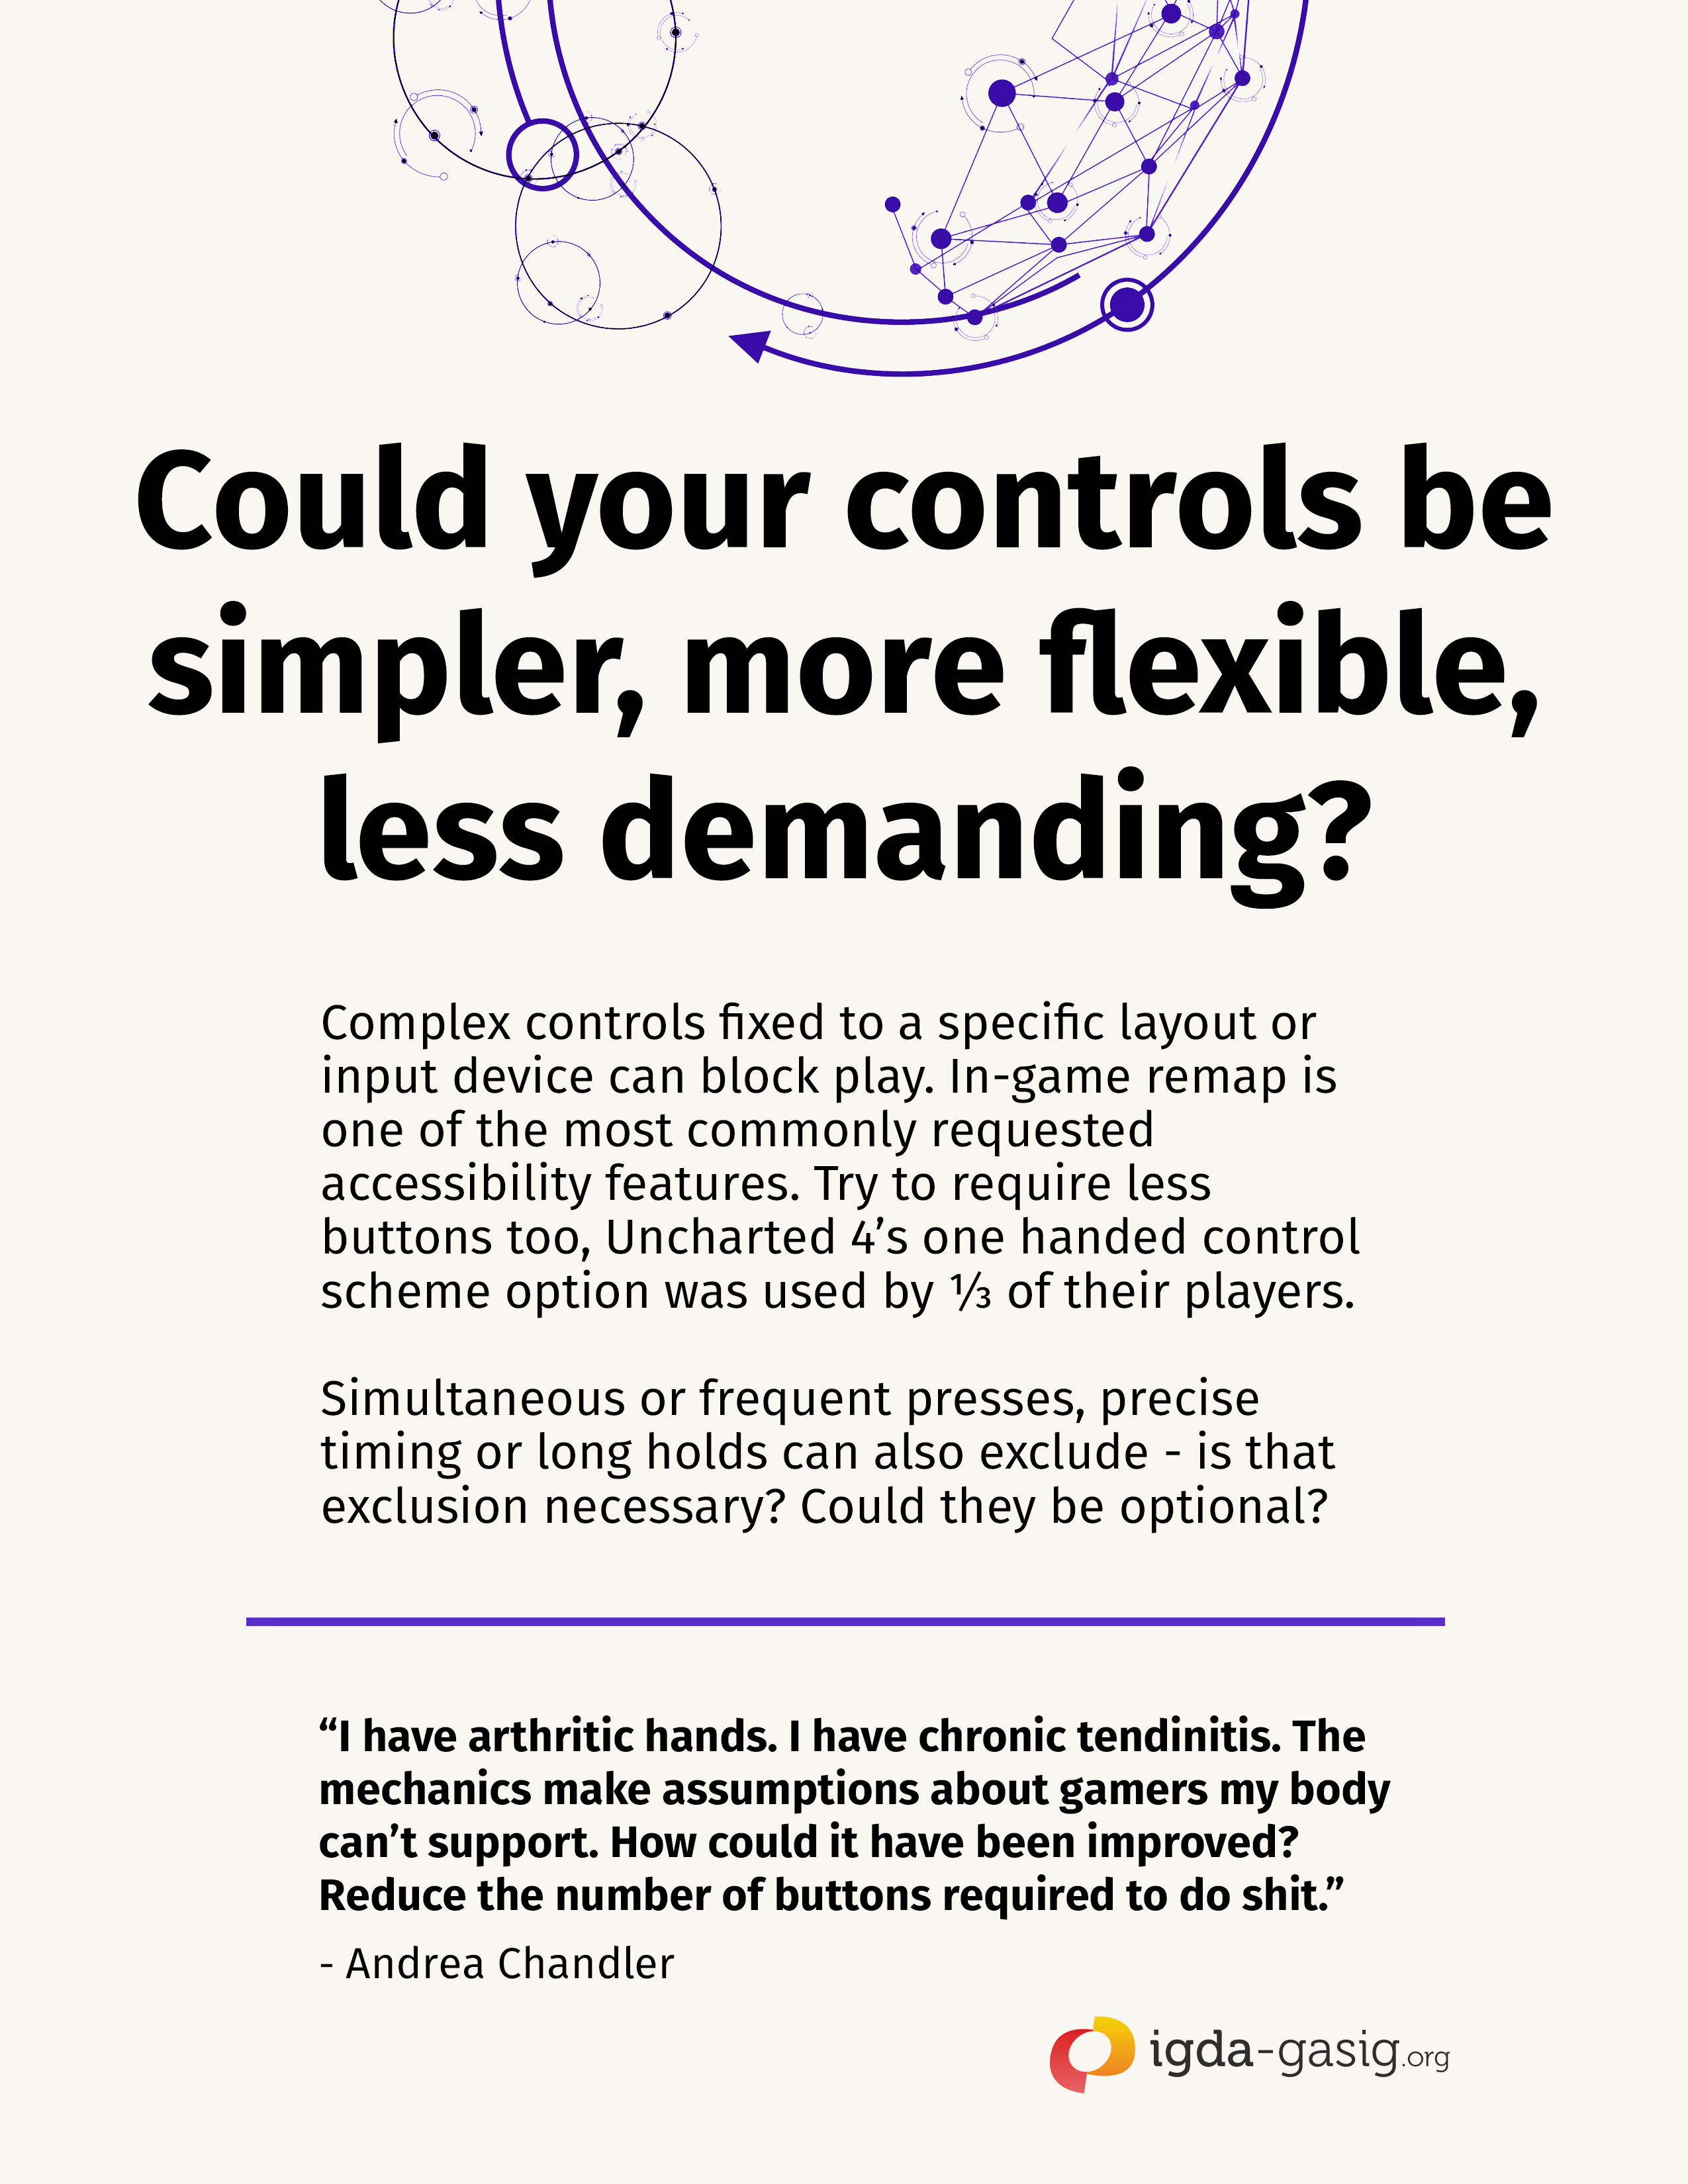 Could your controls be simpler, more flexible, less demanding? (see end of page for full text)